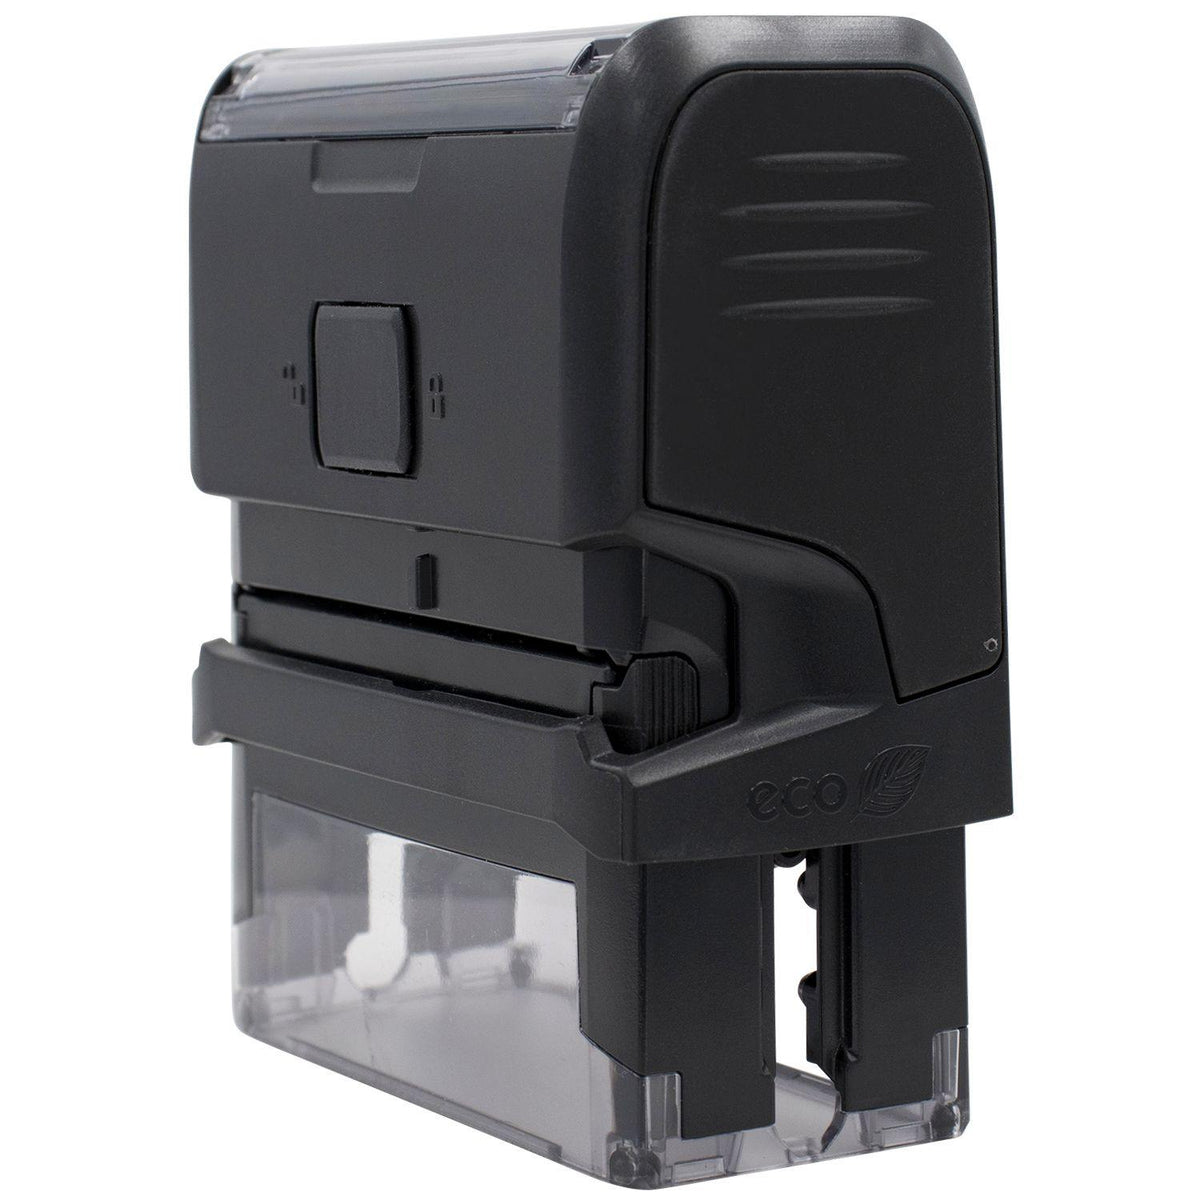 Self-Inking Fax Memo Stamp - Engineer Seal Stamps - Brand_Trodat, Impression Size_Small, Stamp Type_Self-Inking Stamp, Type of Use_Business, Type of Use_Office, Type of Use_Professional